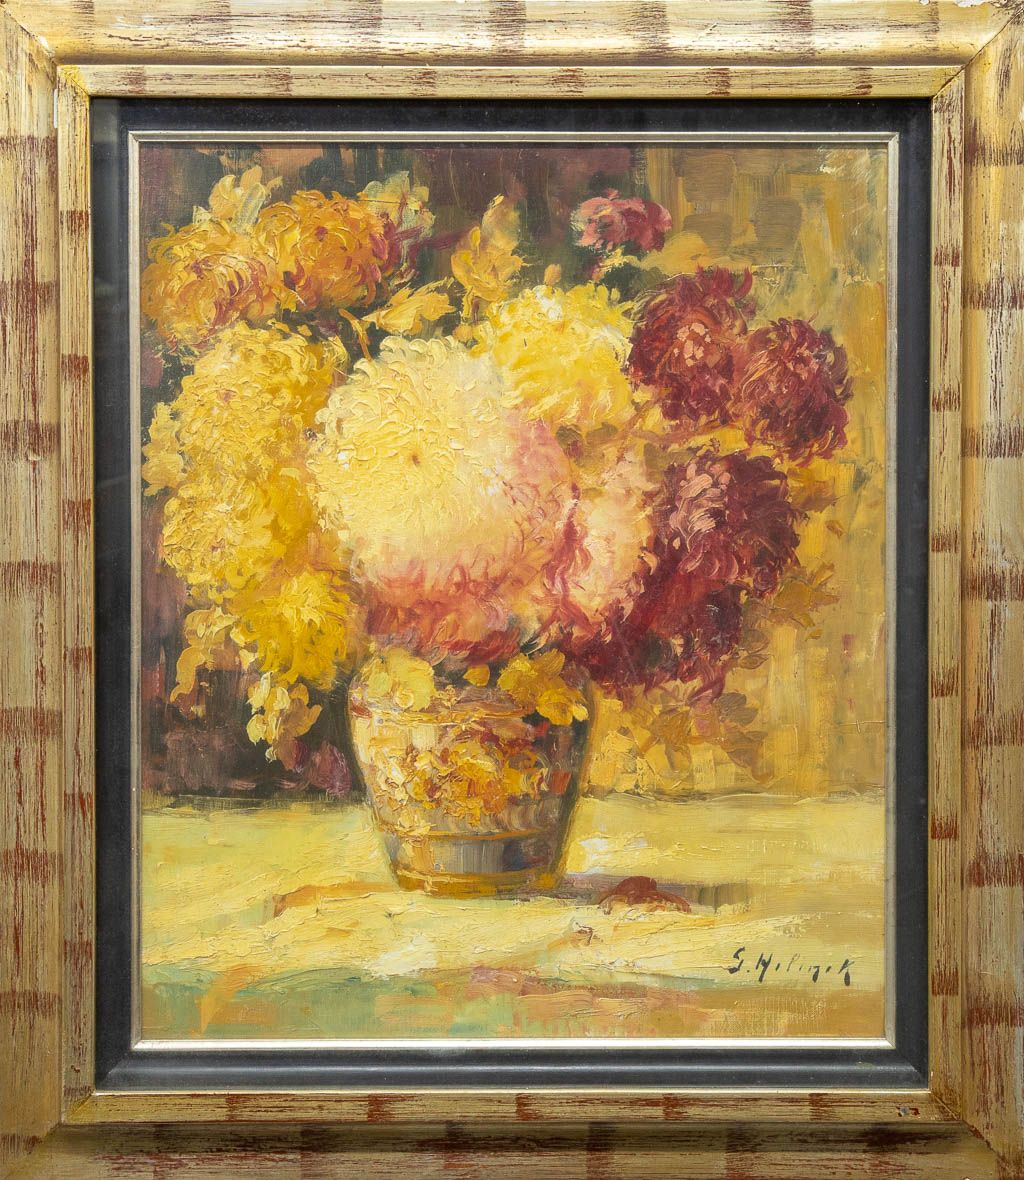 Null Gustave HELINCK (1884-1954) 'Bloementuil' a flower painting, oil on canvas.&hellip;